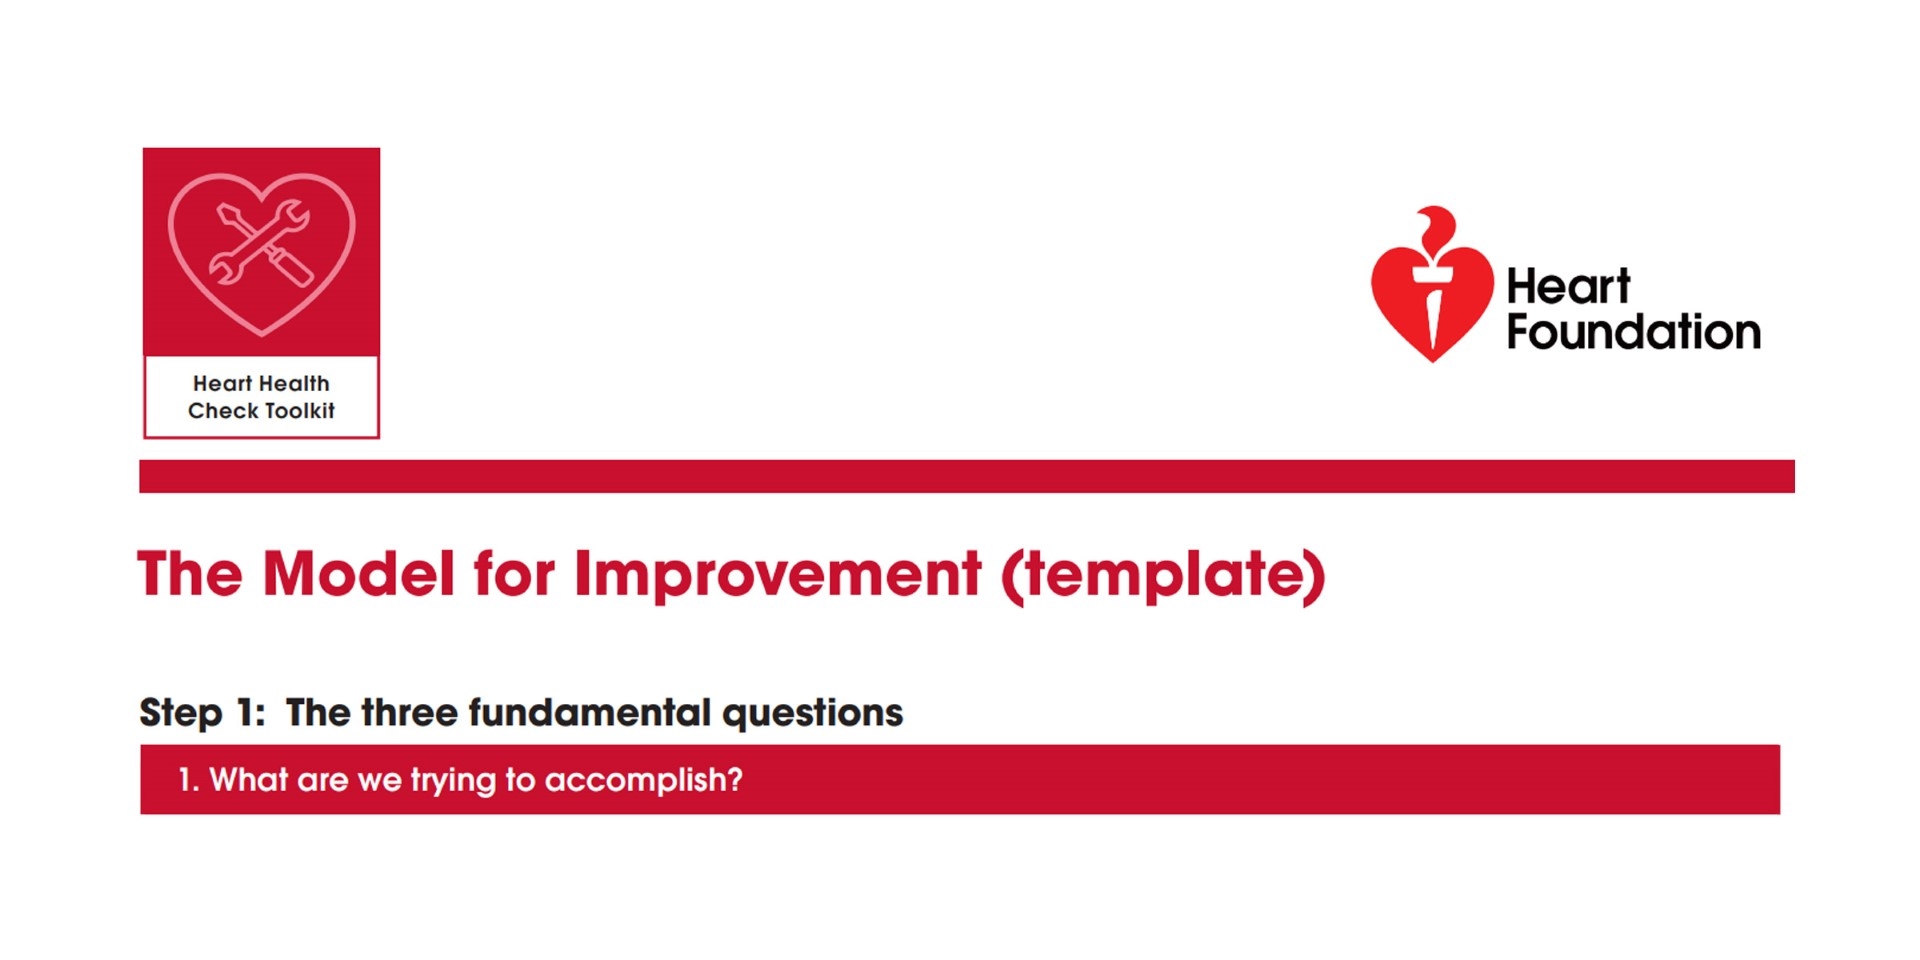 The Model for Improvement (template)